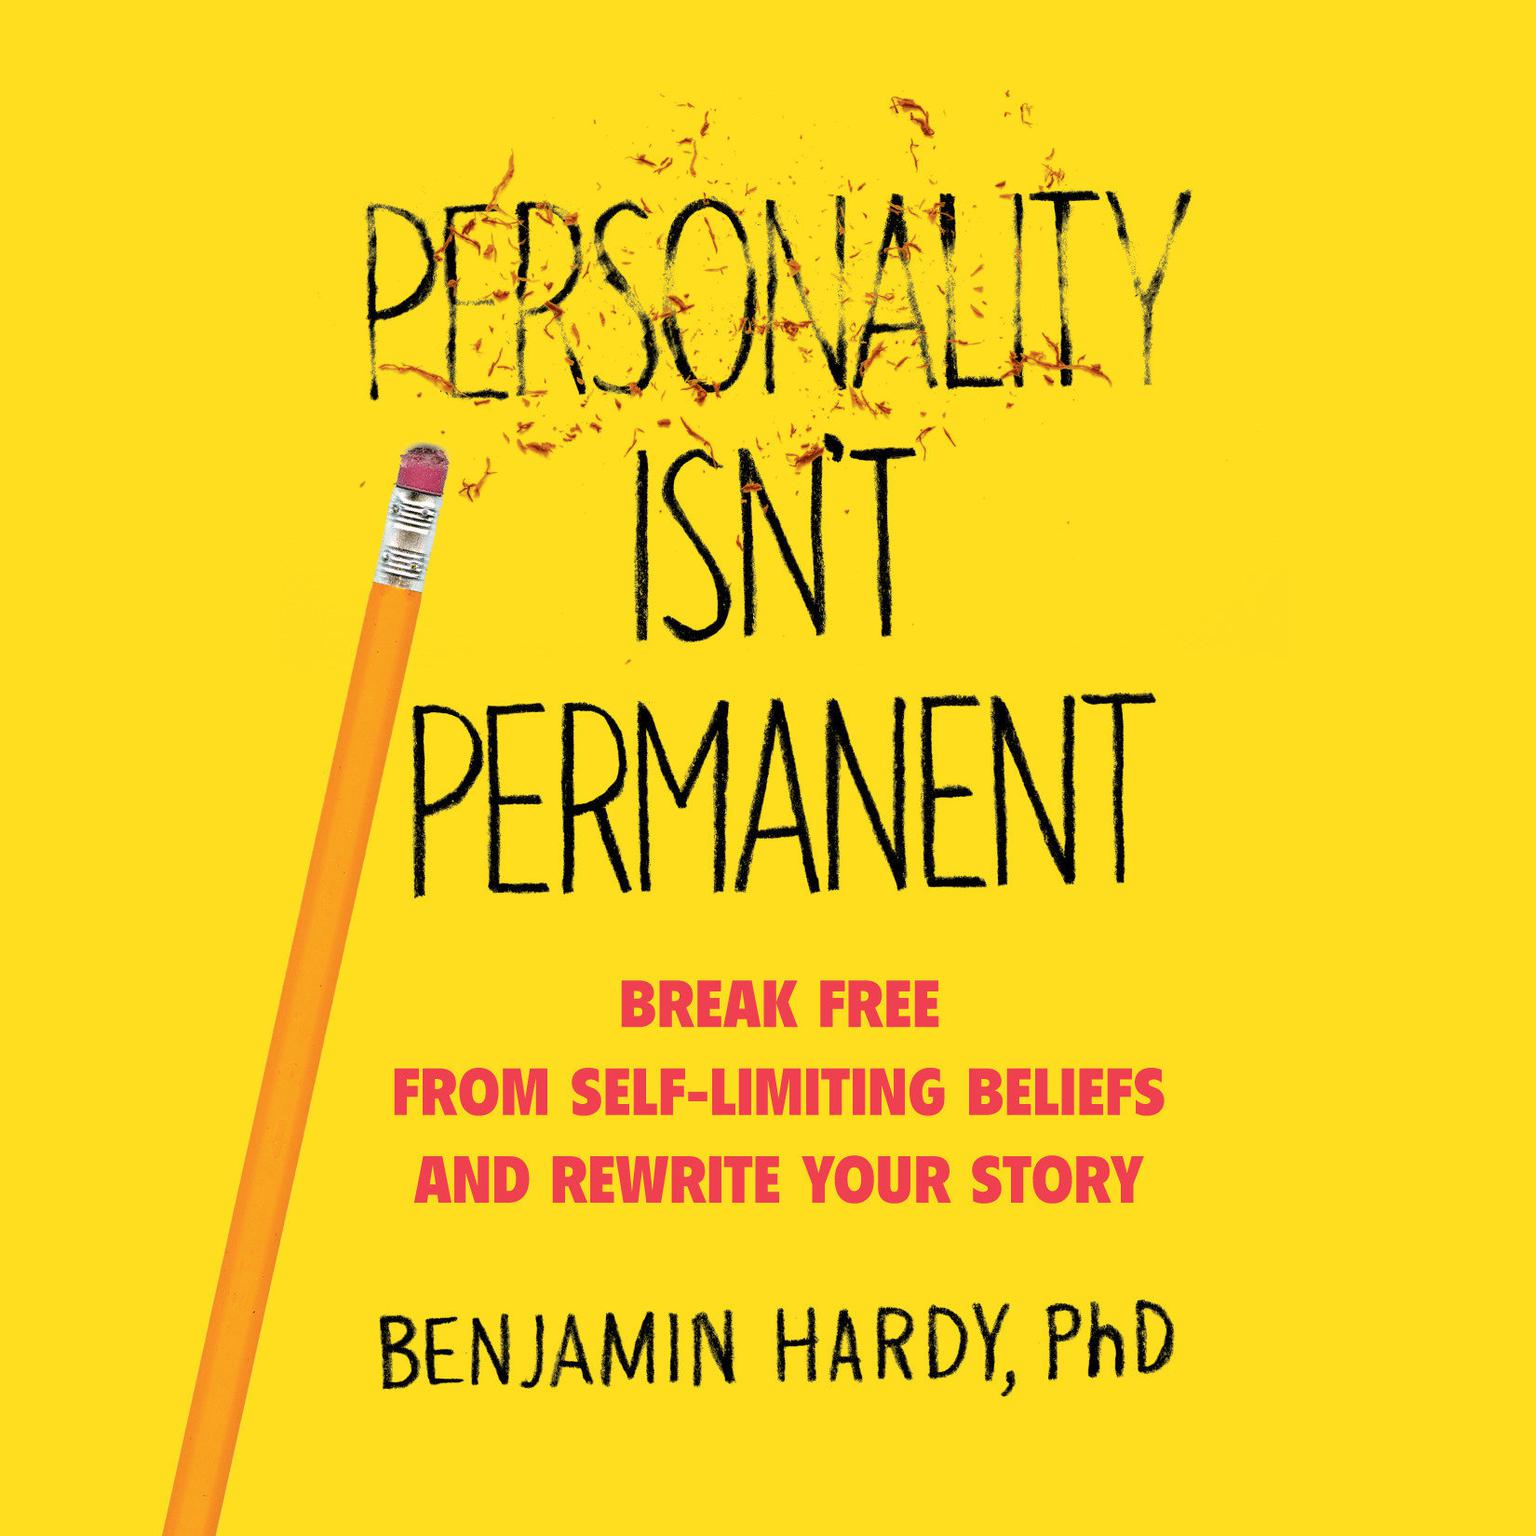 Personality Isnt Permanent: Break Free from Self-Limiting Beliefs and Rewrite Your Story Audiobook, by Benjamin Hardy